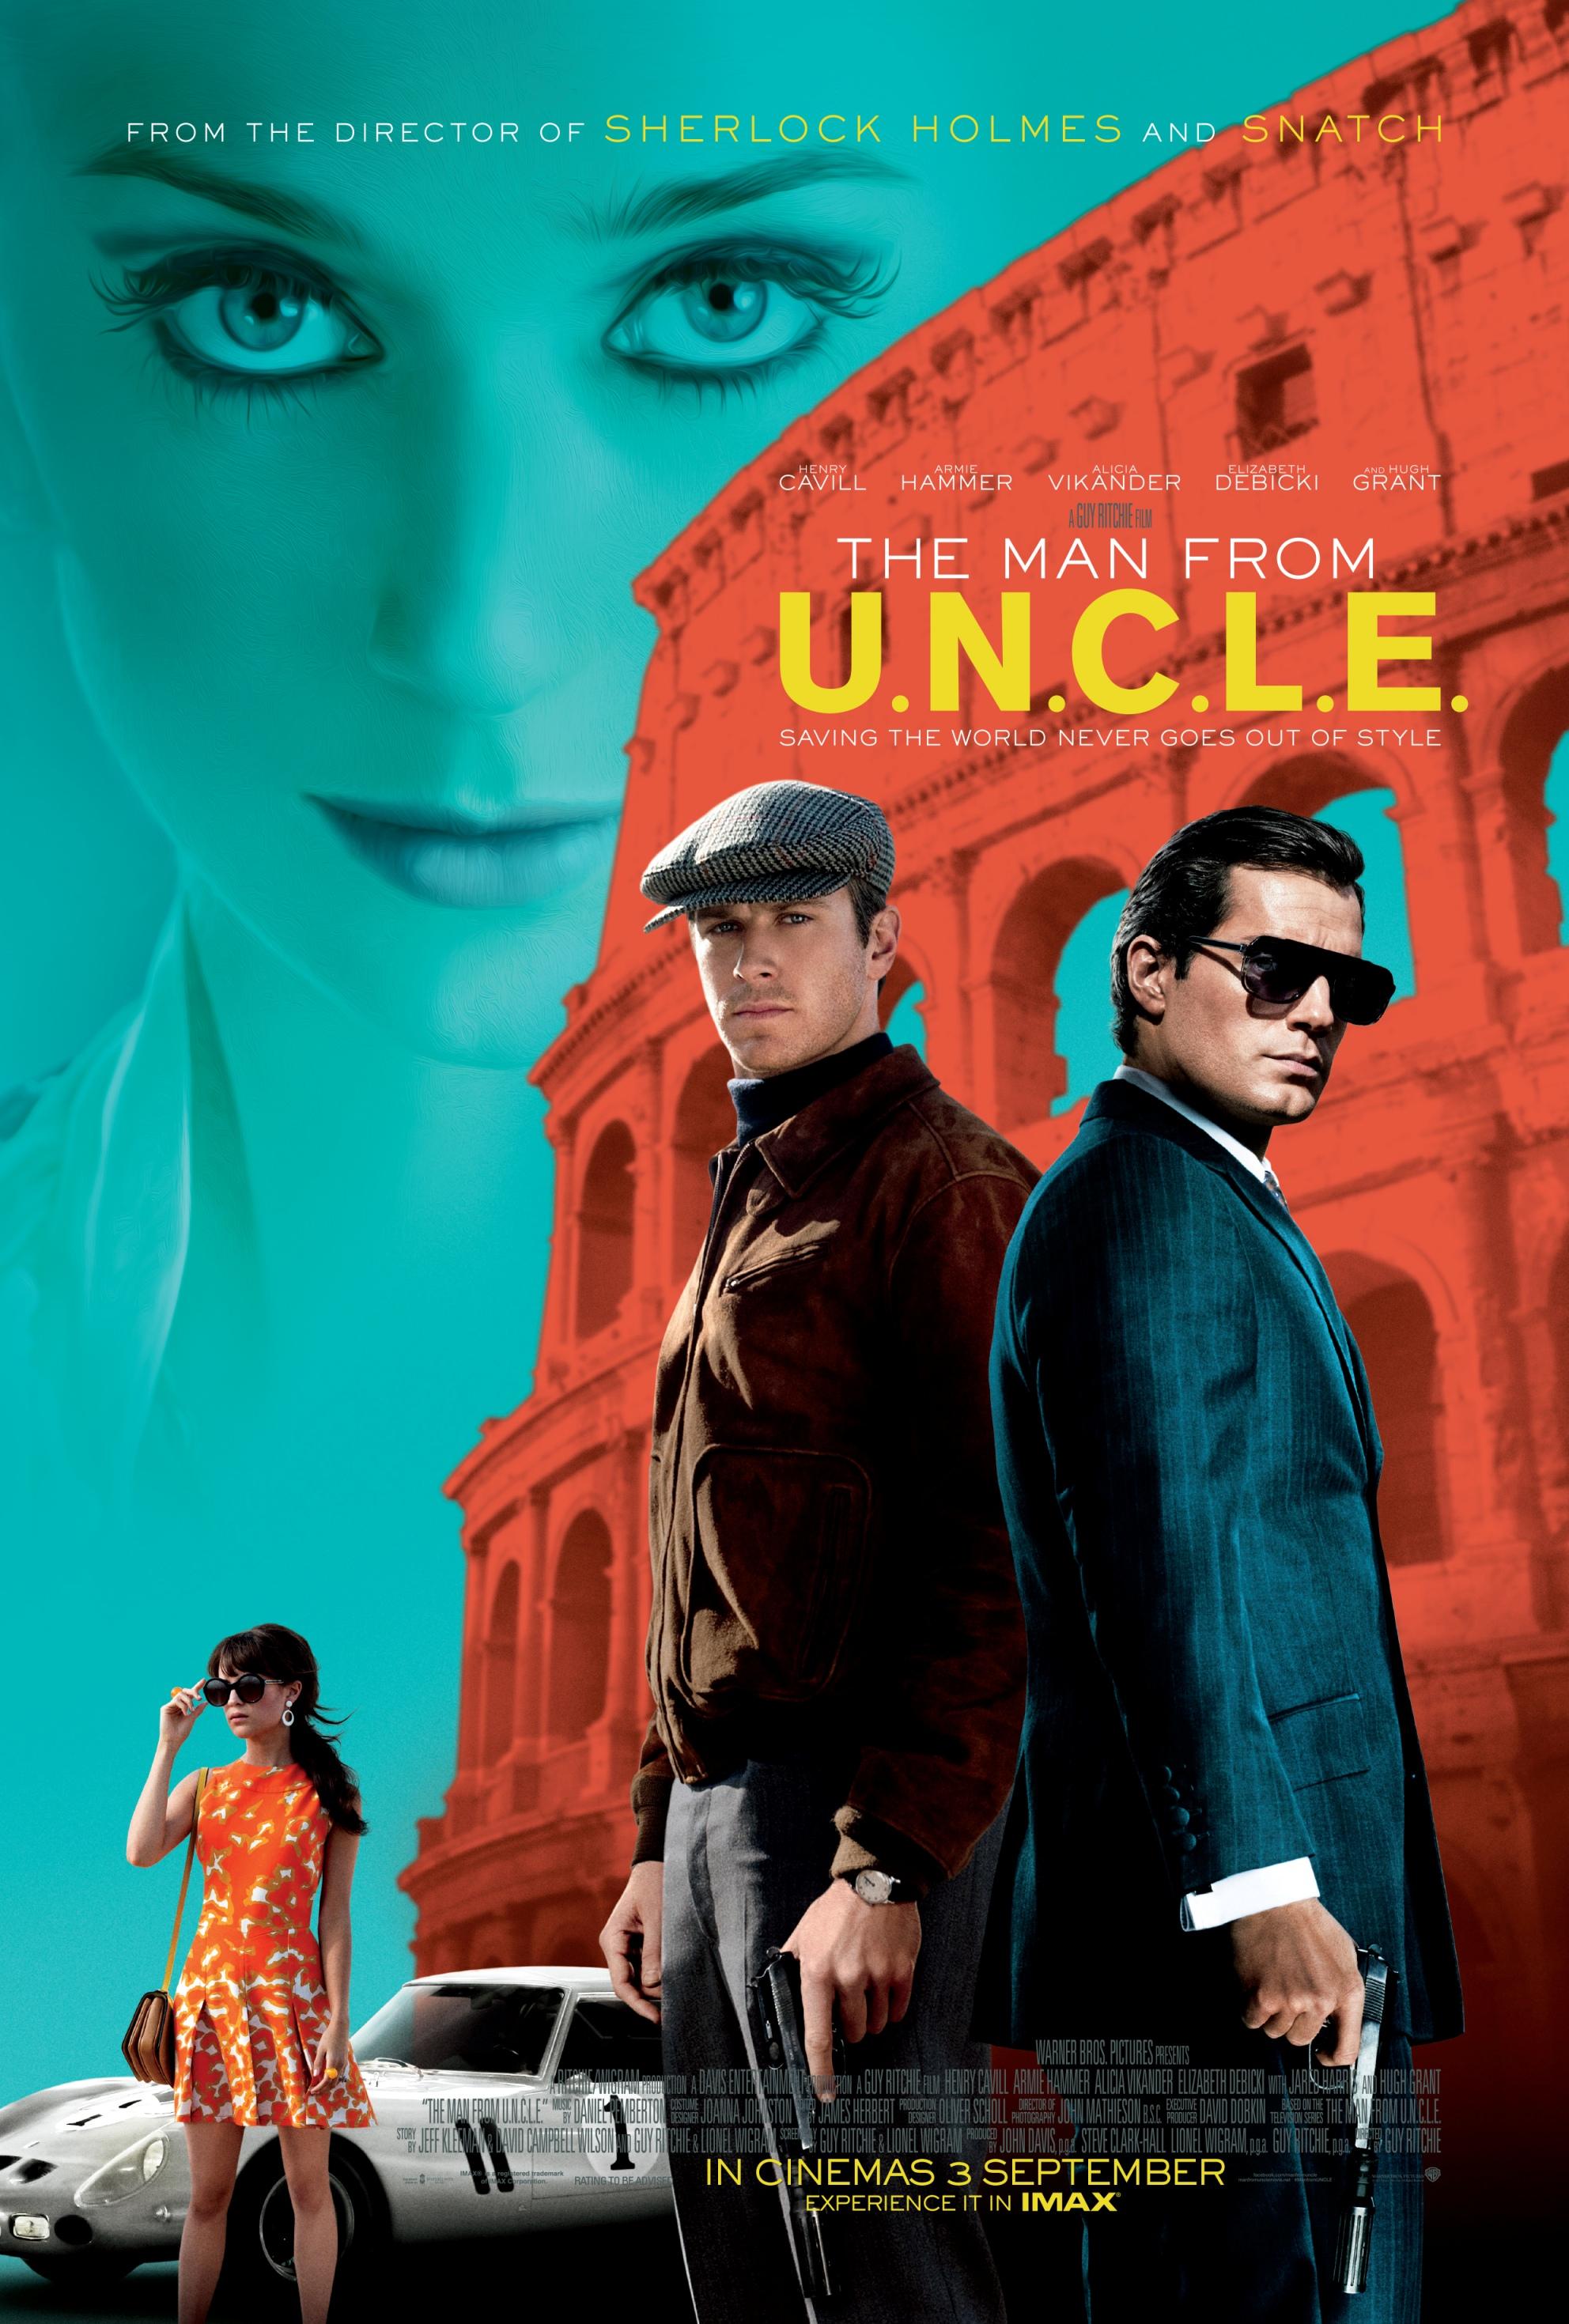 The Man From U.N.C.L.E. Main Poster